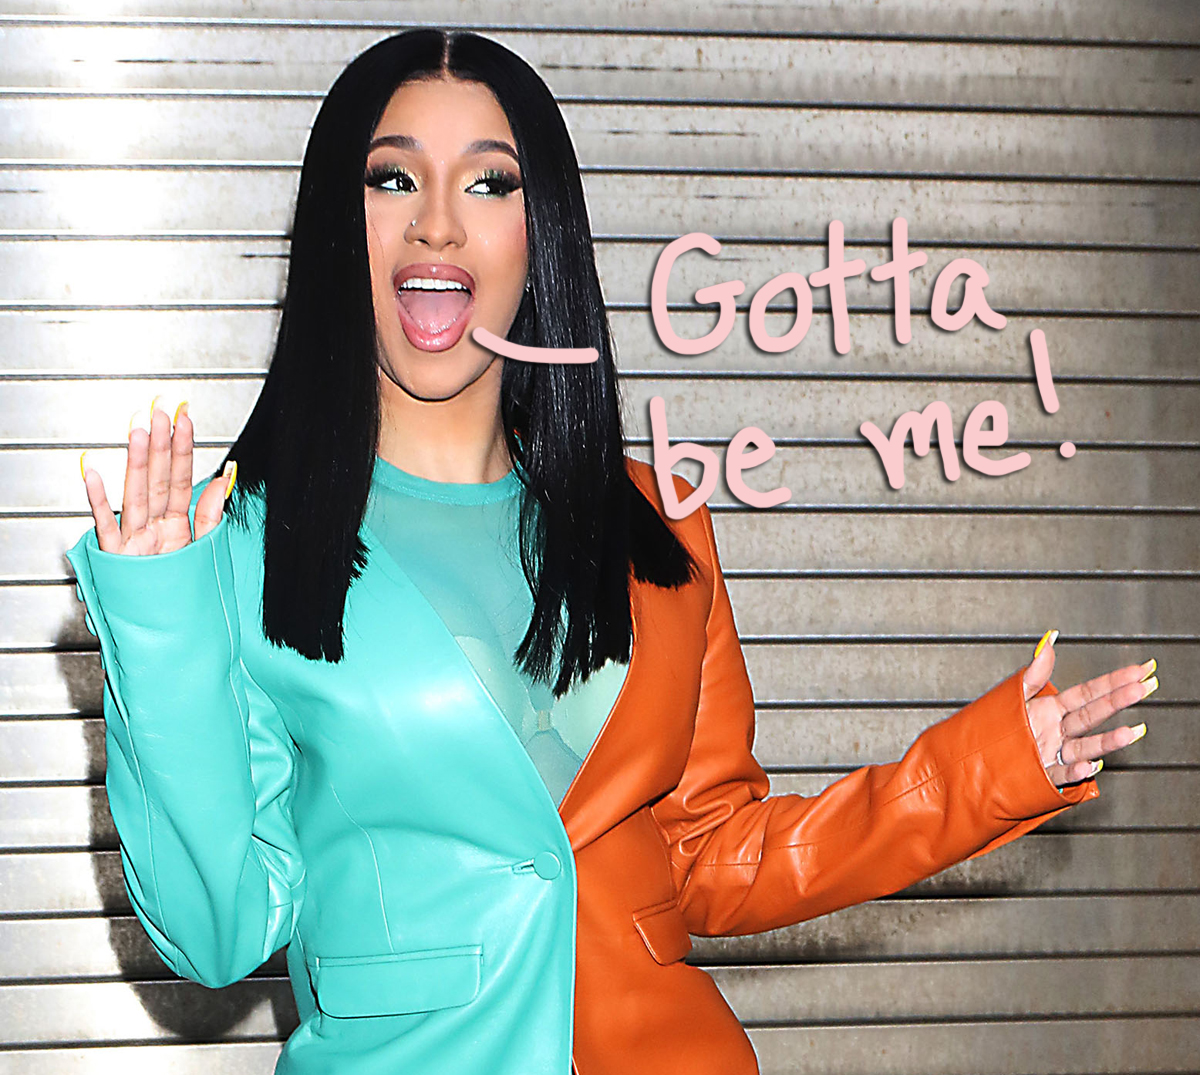 Cardi B Steals The Show With Glamorous Appearance At NYC Court Date